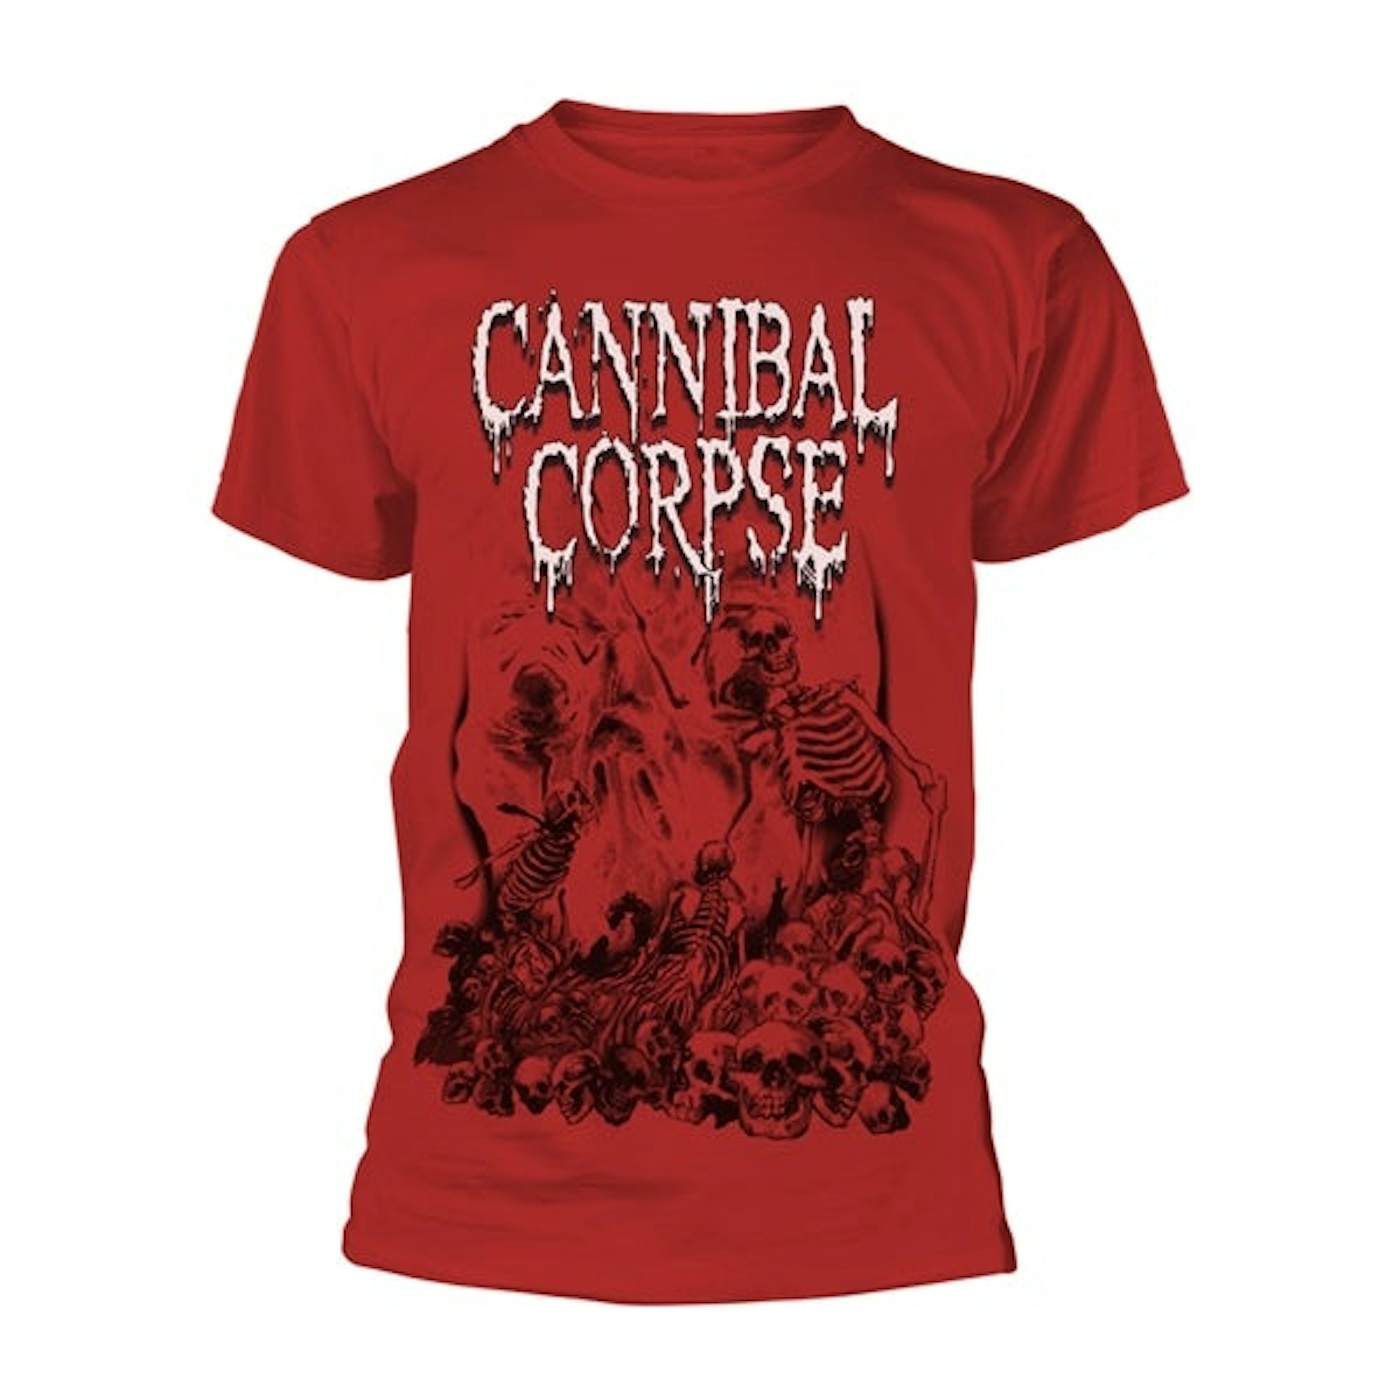 Cannibal Corpse T-Shirt - Pile Of Skulls 2018 (Red)